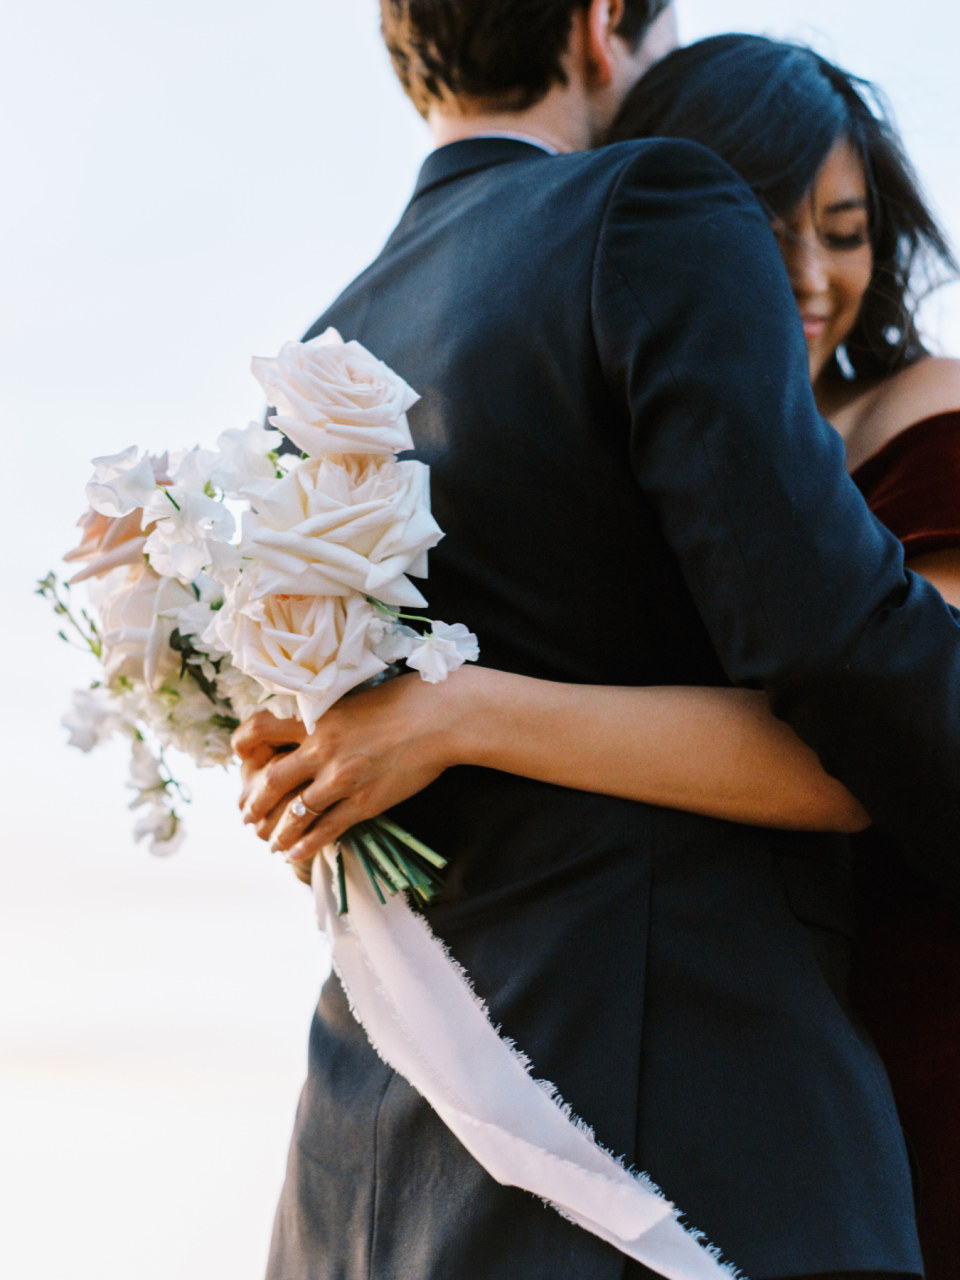 Woman and man hugging with woman's arms around his back, holding bouquet.